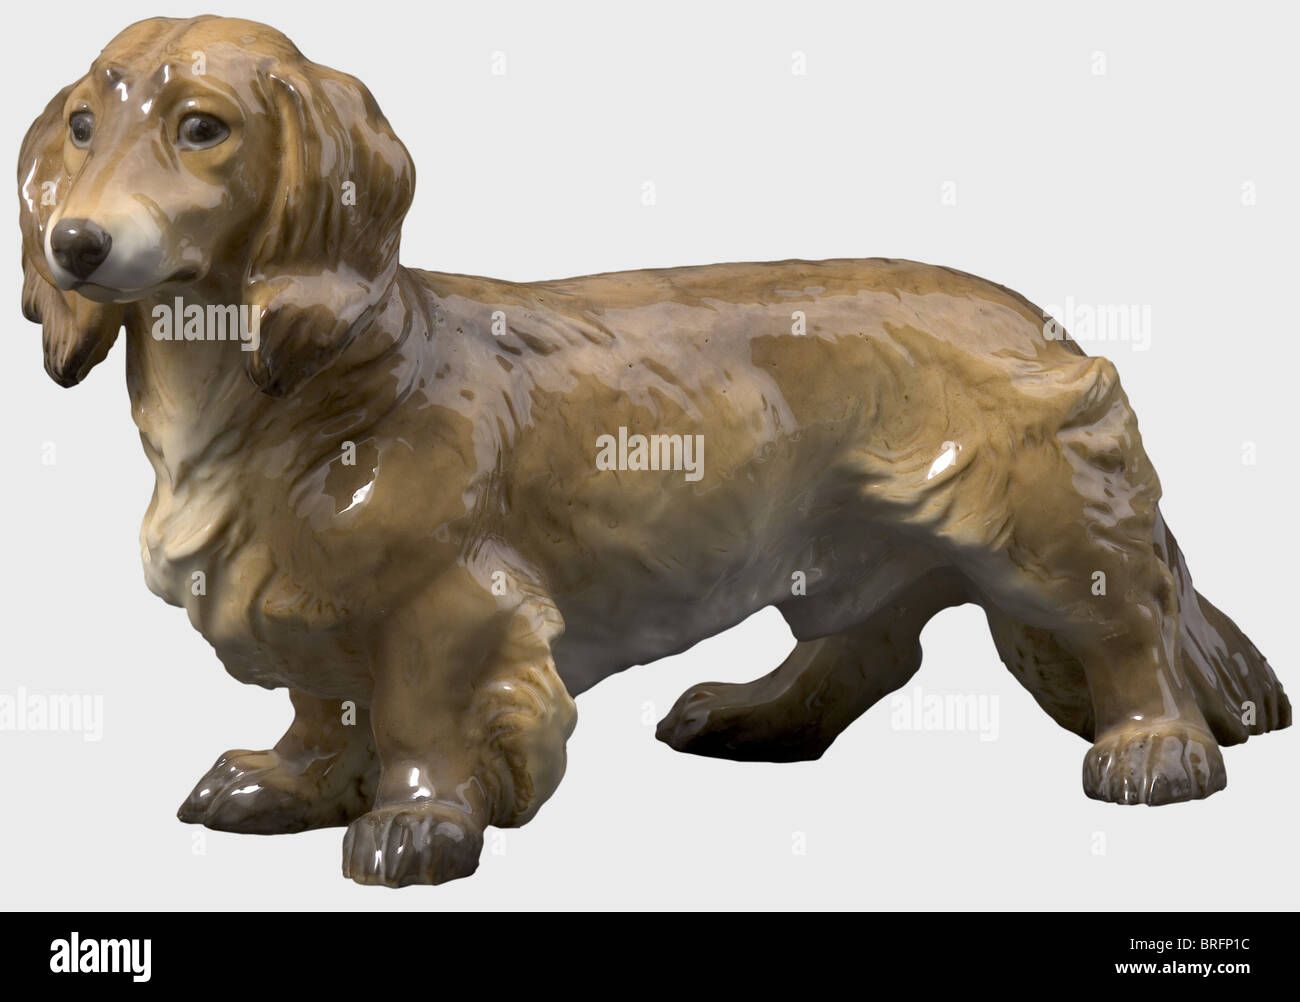 A longhaired dachshund, designed by Ottmar Obermaier. Model number '75'. Colour-glazed porcelain. Model number, and pressmark 'SS-Allach' on the belly. Height 19 cm. historic, historical, 1930s, 1930s, 20th century, object, objects, stills, clipping, clippings, cut out, cut-out, cut-outs, Additional-Rights-Clearences-Not Available Stock Photo